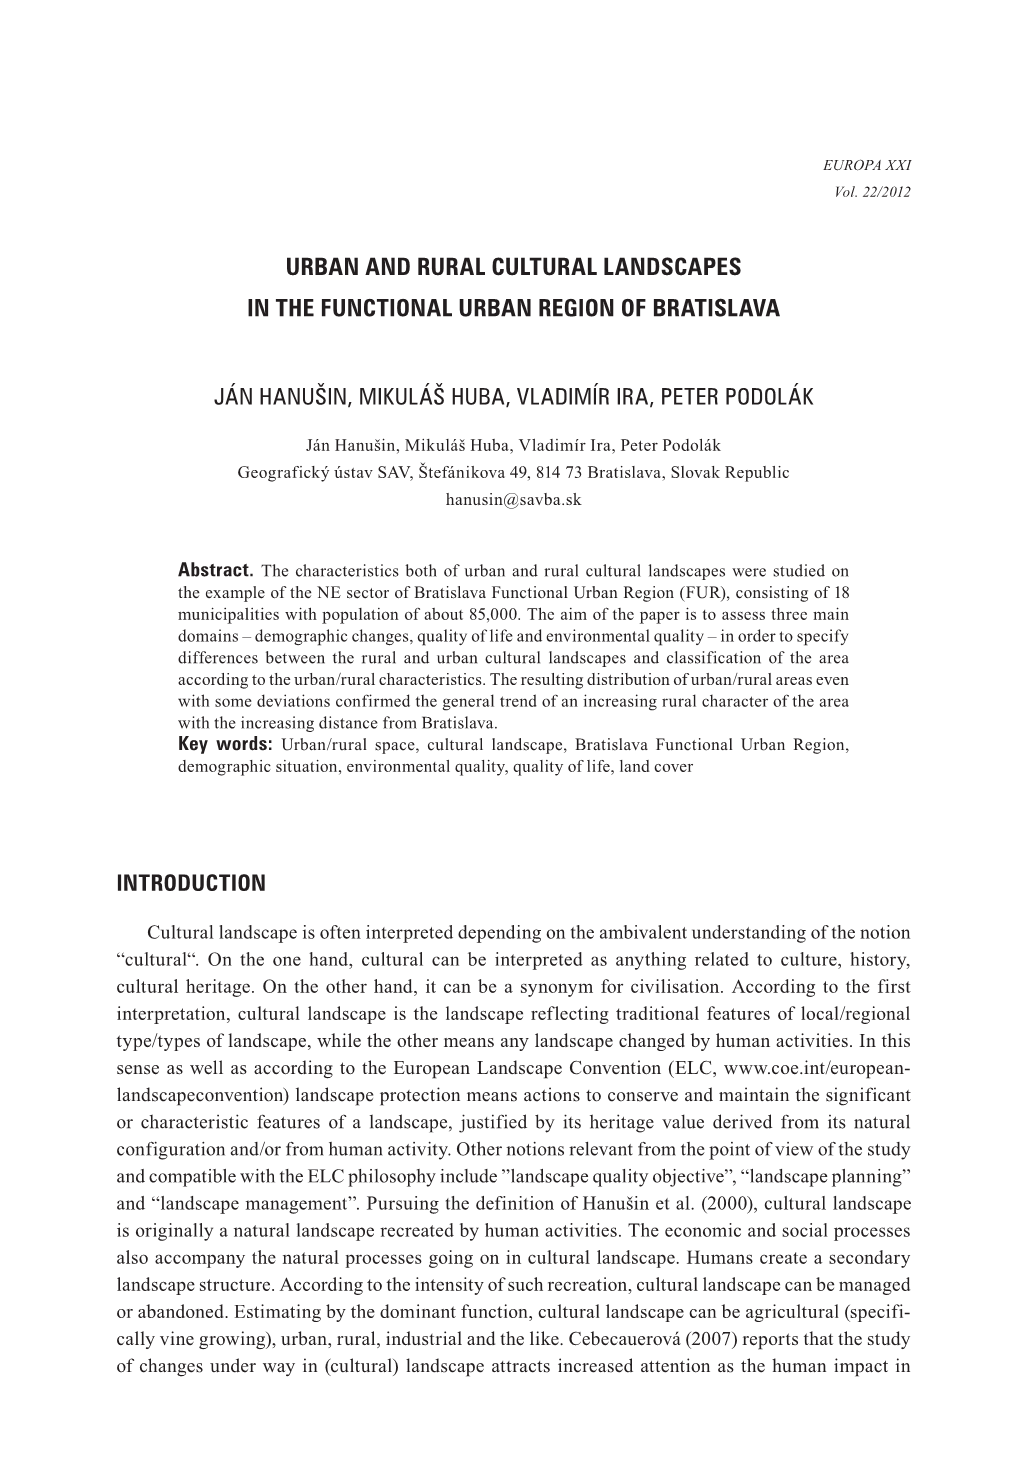 Urban and Rural Cultural Landscapes in the Functional Urban Region of Bratislava